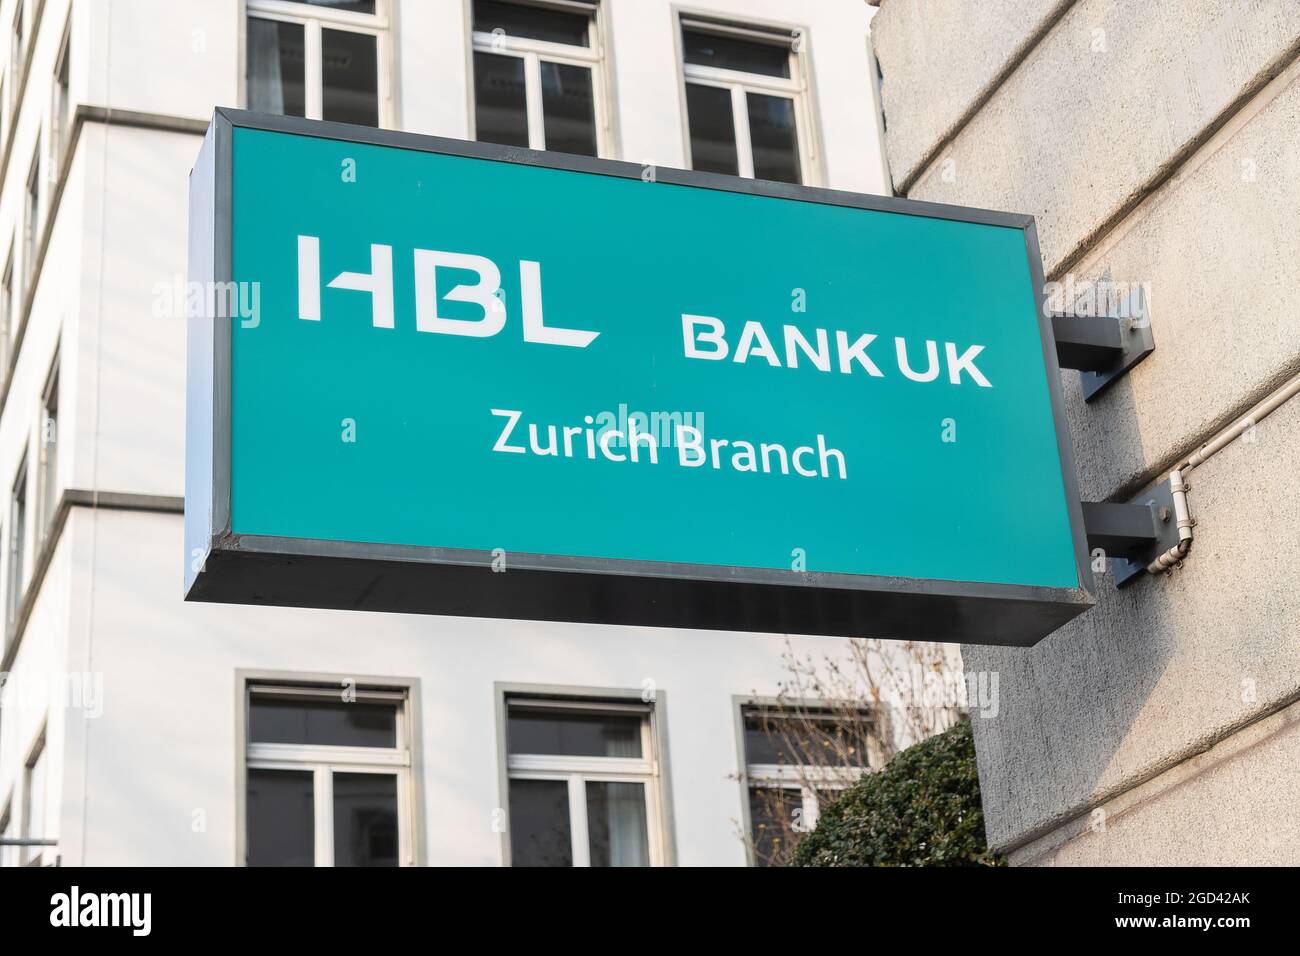 Zurich, Switzerland - January 10, 2021: HBL - Habib bank Limited is a Swiss multinational commercial bank which is based in Zurich, Switzerland. Stock Photo